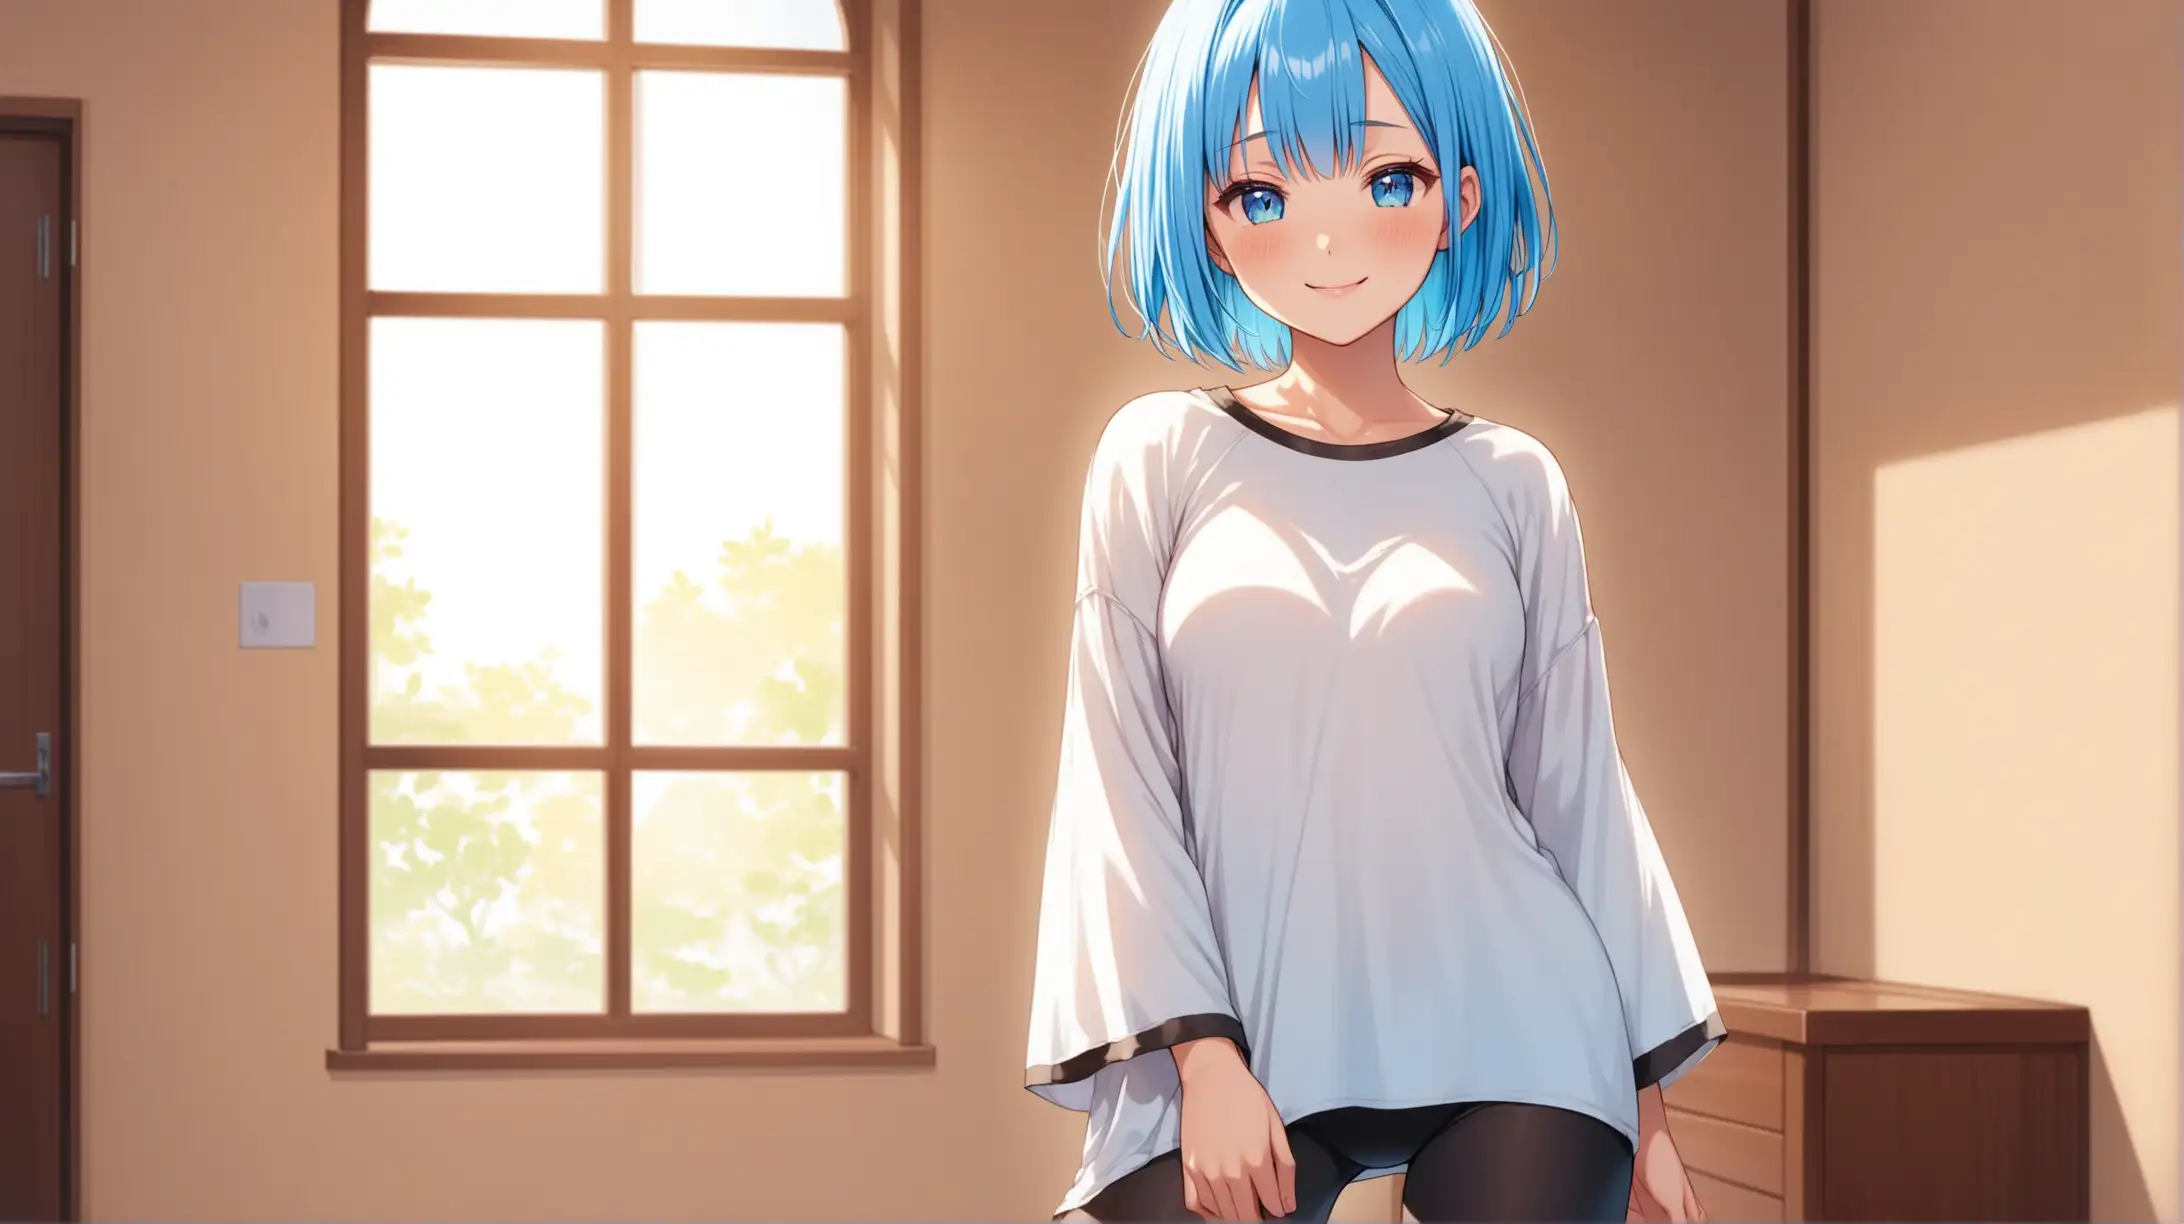 Rem Smiling Serenely Indoors in Casual Attire